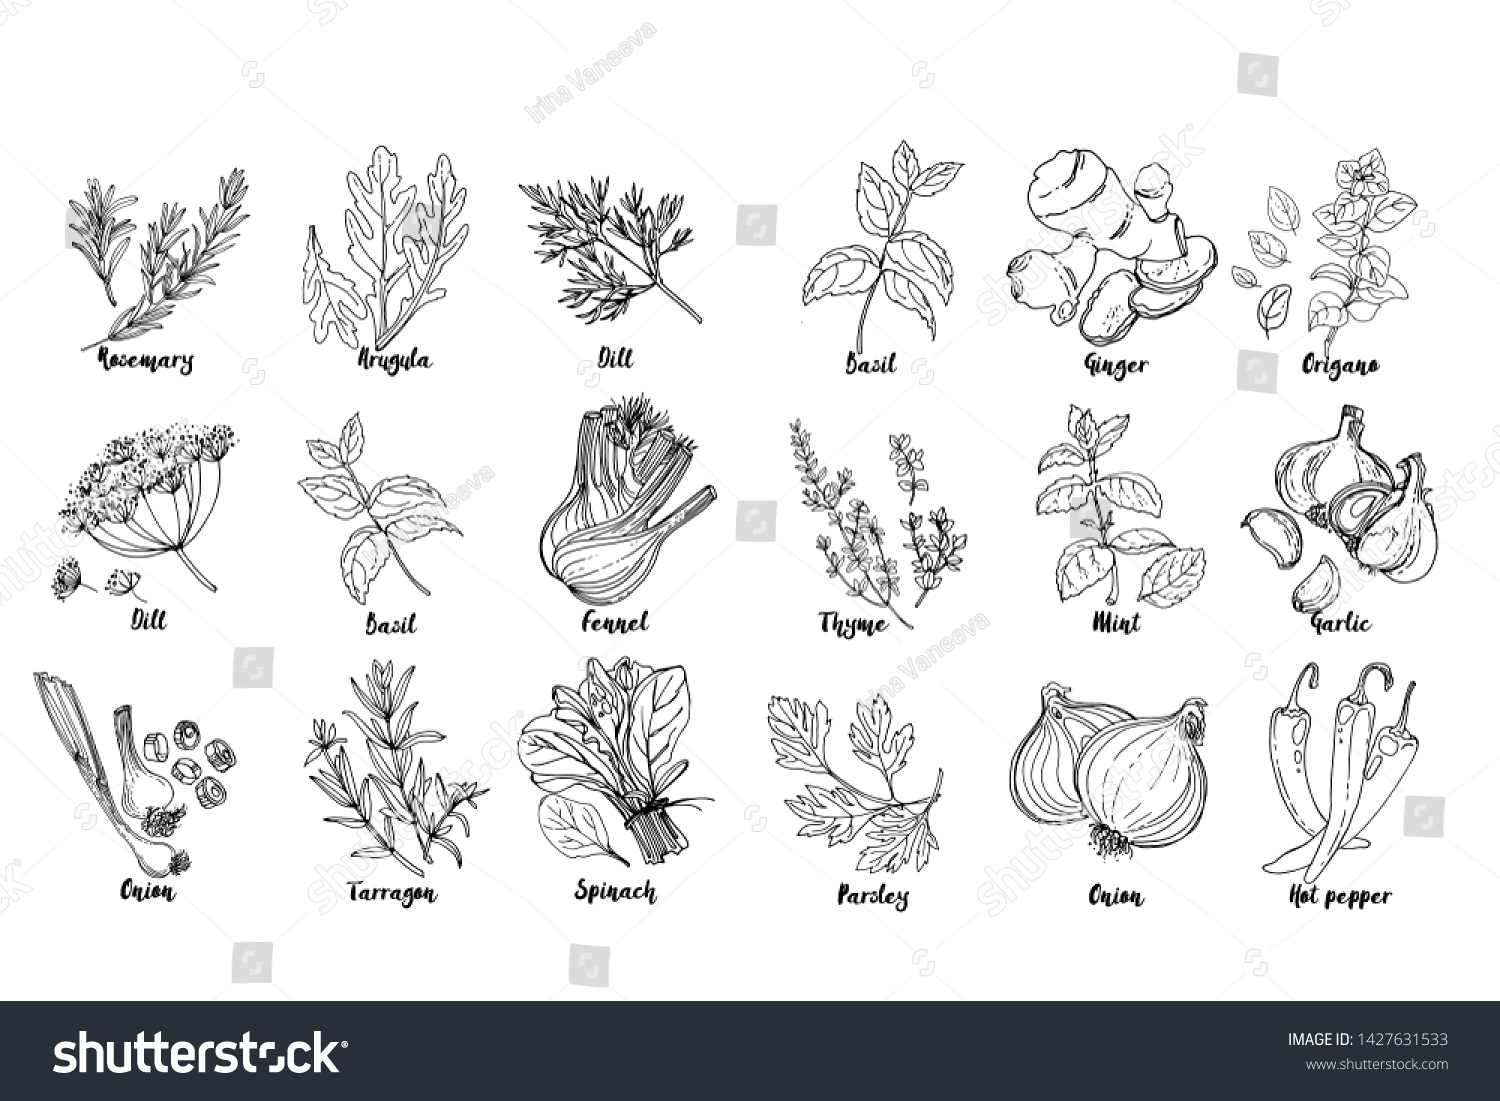 Herbs. Spices. Italian herb drawn black lines on a white background. Vector illustration. Basil, ginger, origano, Thame, mint, garlic, parsley, onion, hot pepper, rosemary, arugula, dill, basil